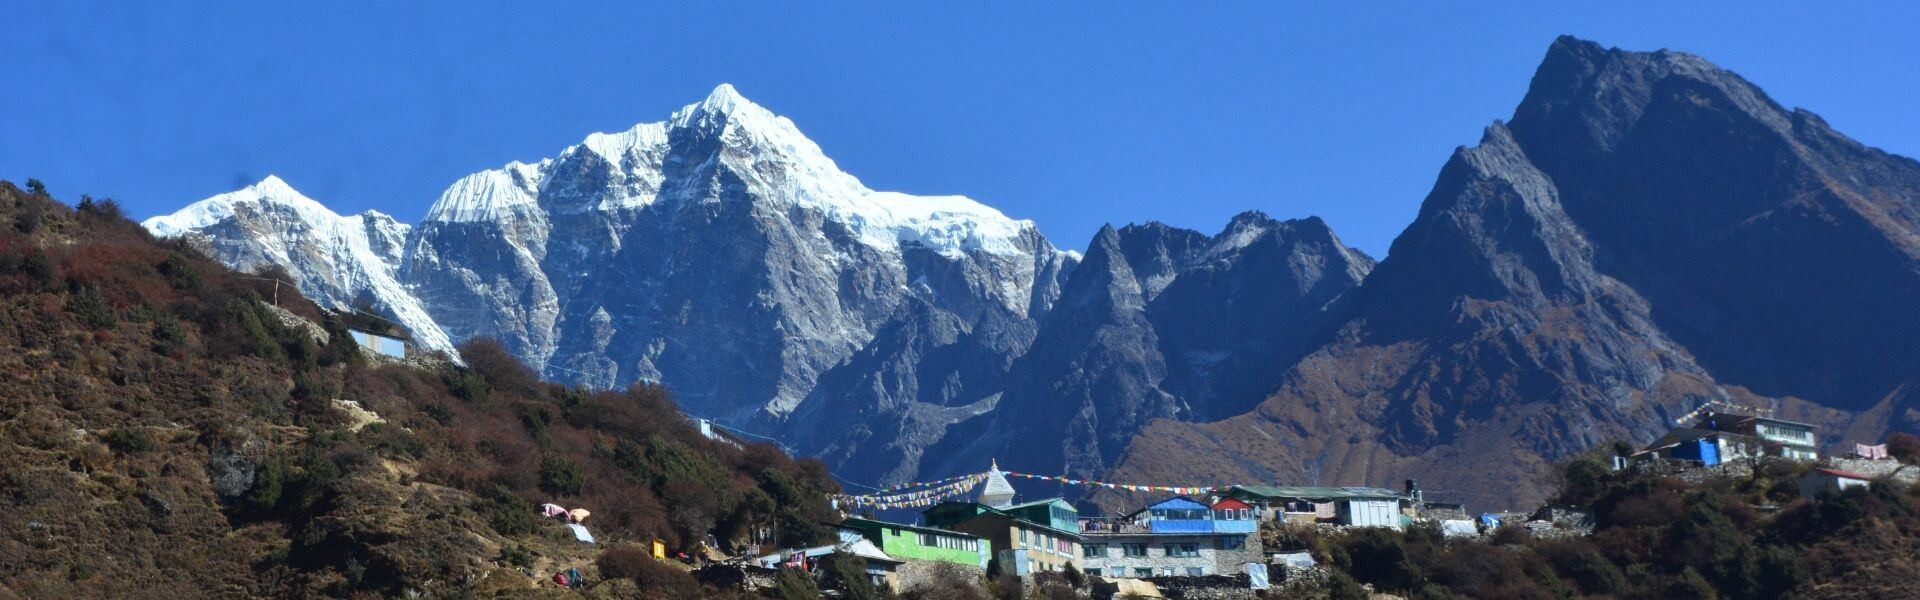 How difficult is to climb the Everest Base Camp Trek